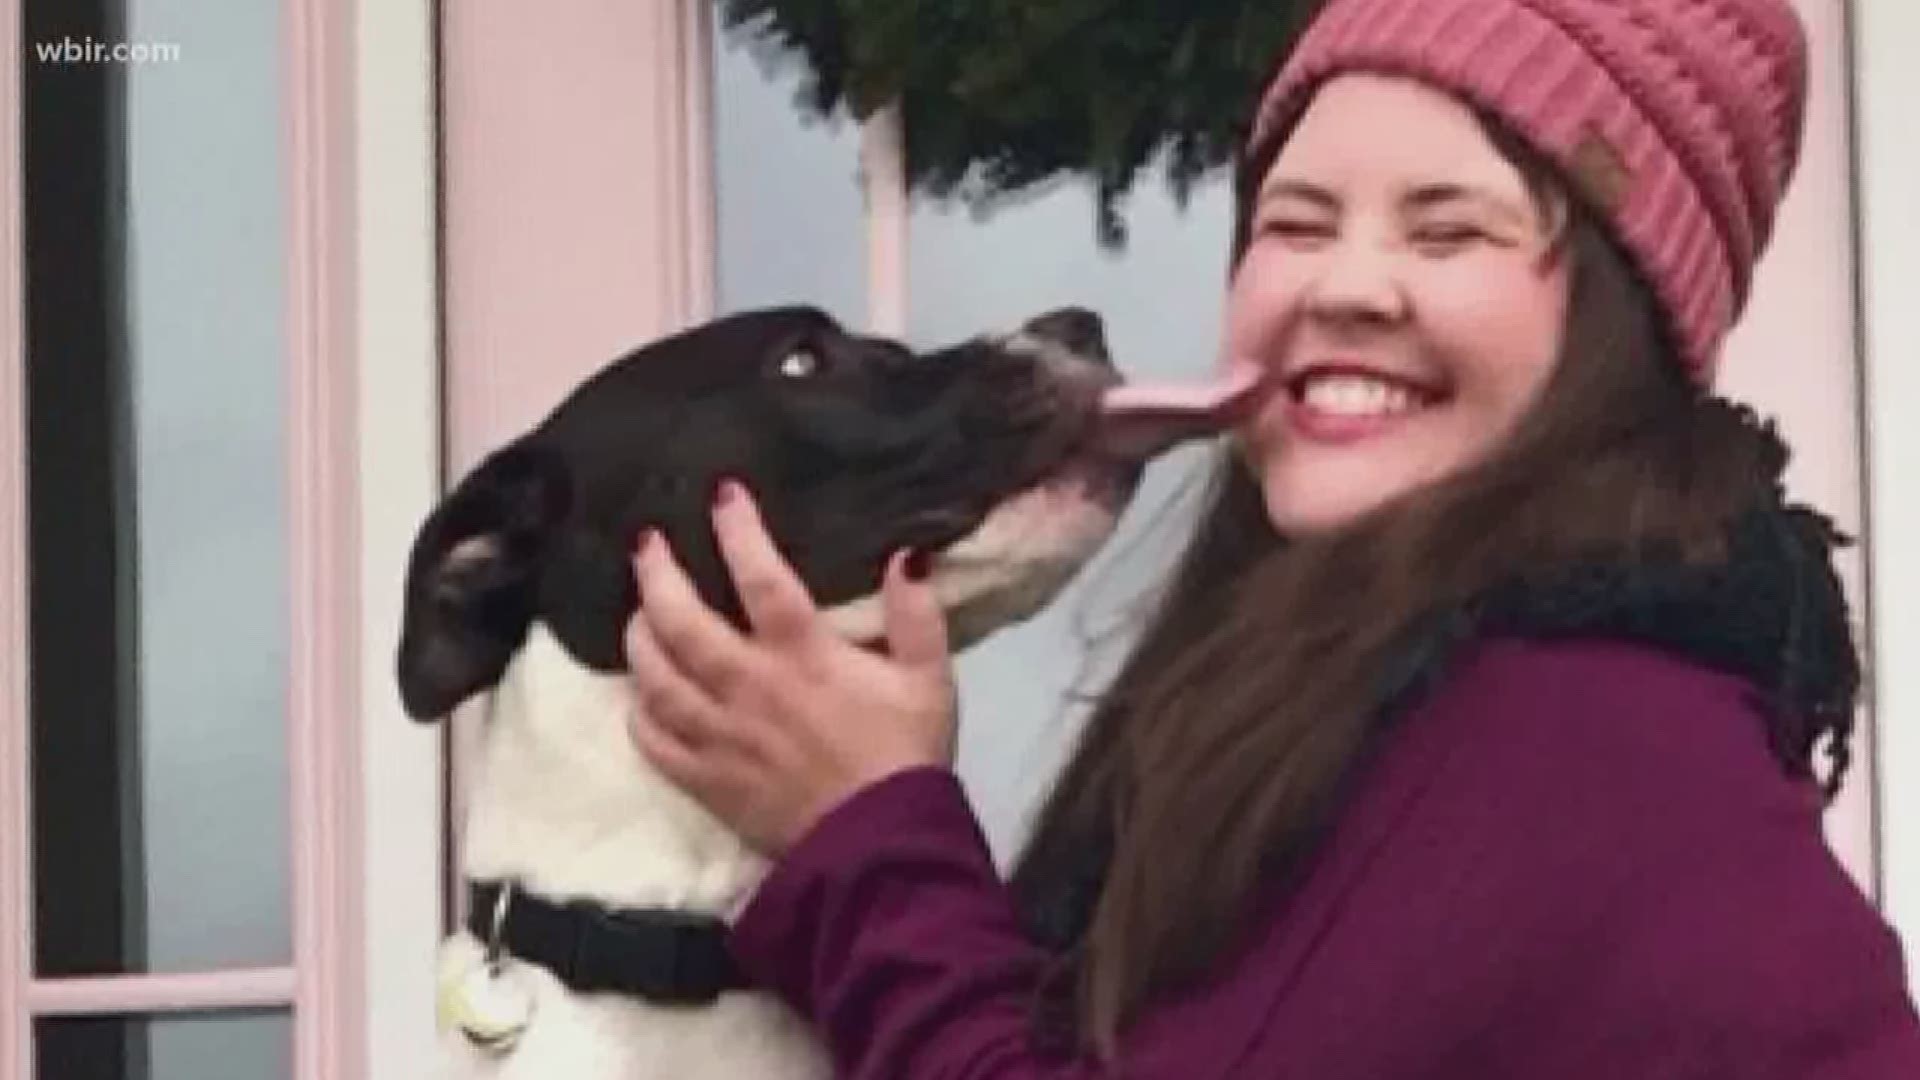 Live at Five at Four hosted its first-ever blind date live on the show. Our bachelorette, Katie, is a  working girl who loves animals. Feb. 14, 2019-4pm